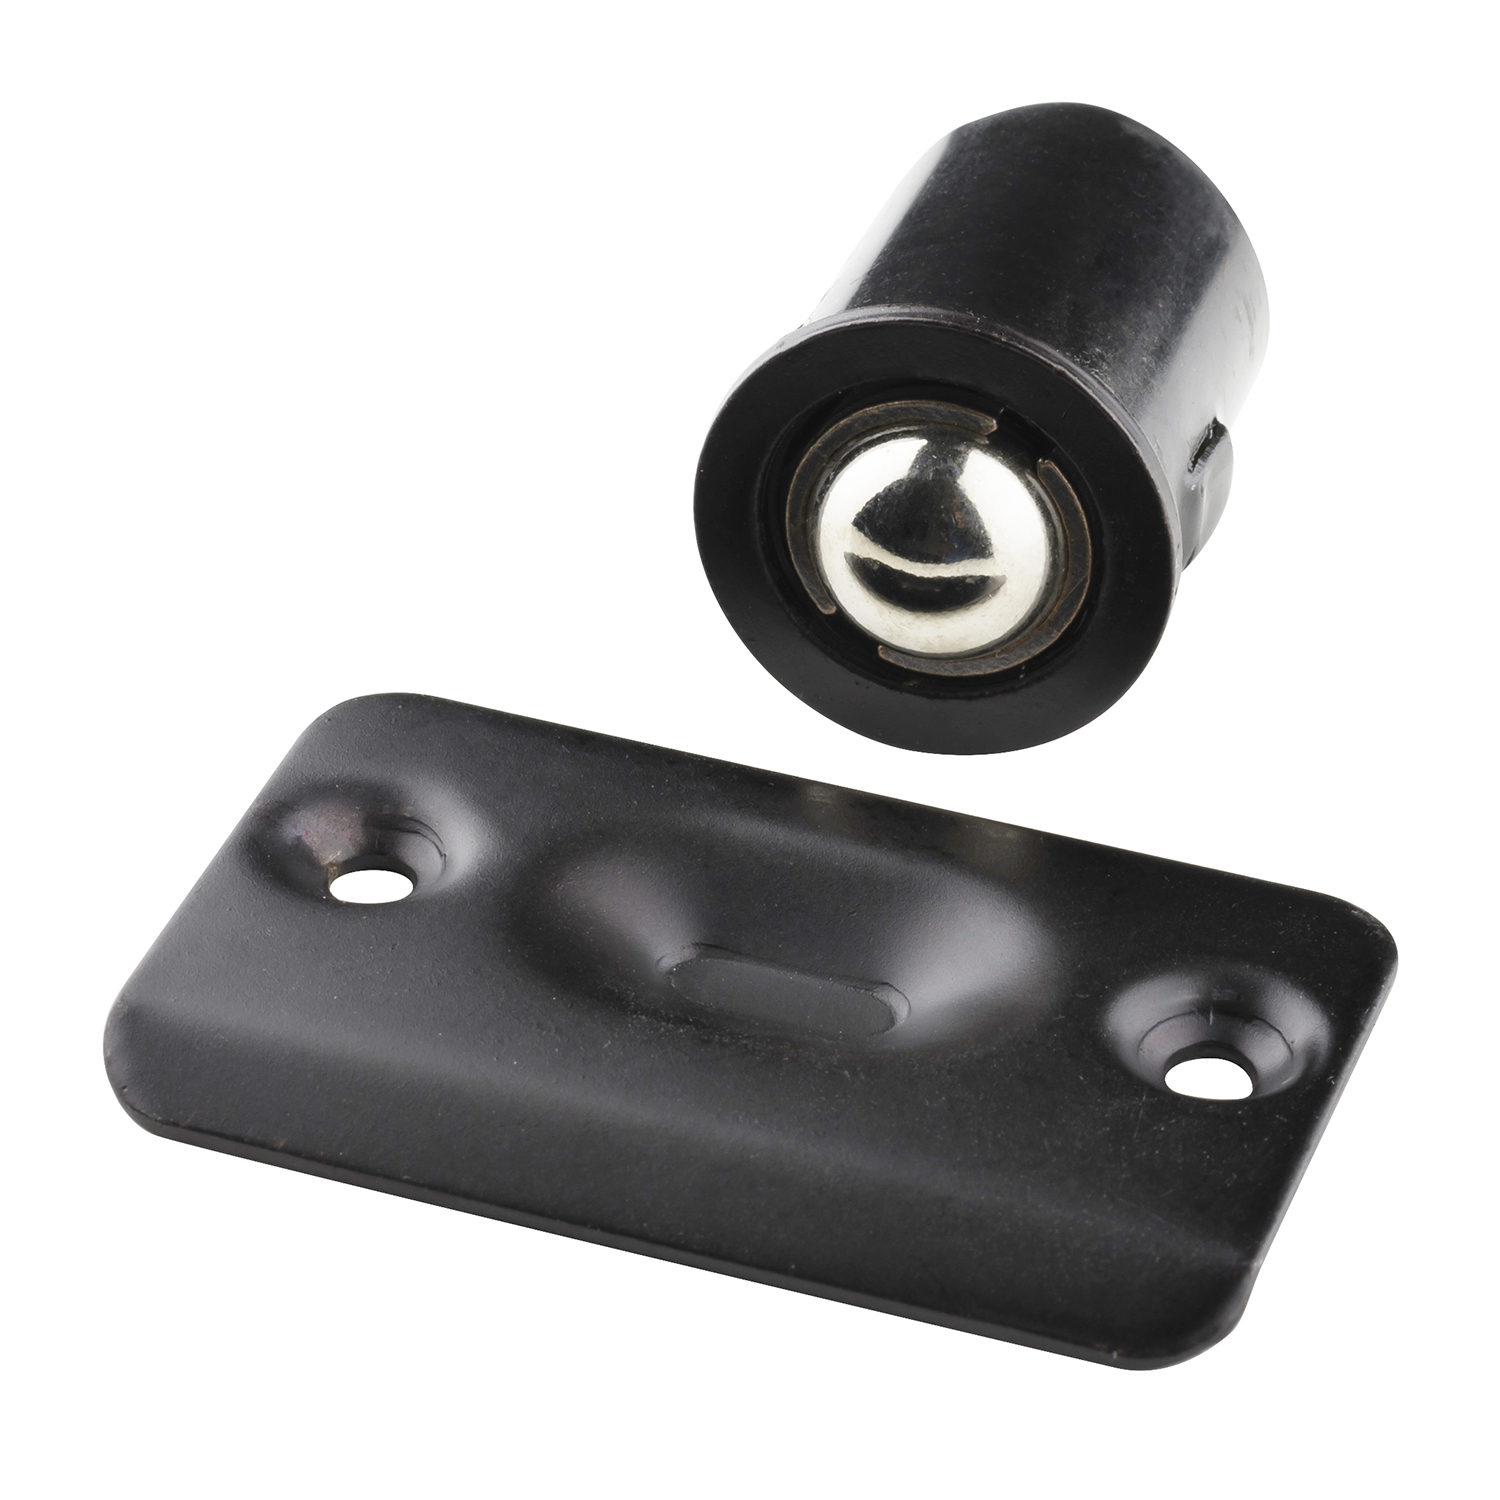 Bullet Catches - Drive-In Adjustable Bullet Catch with Full Lip Strike Plate - Drive-In Adjustable Bullet Catch with Full Lip Strike Plate - Oil Rubbed Bronze